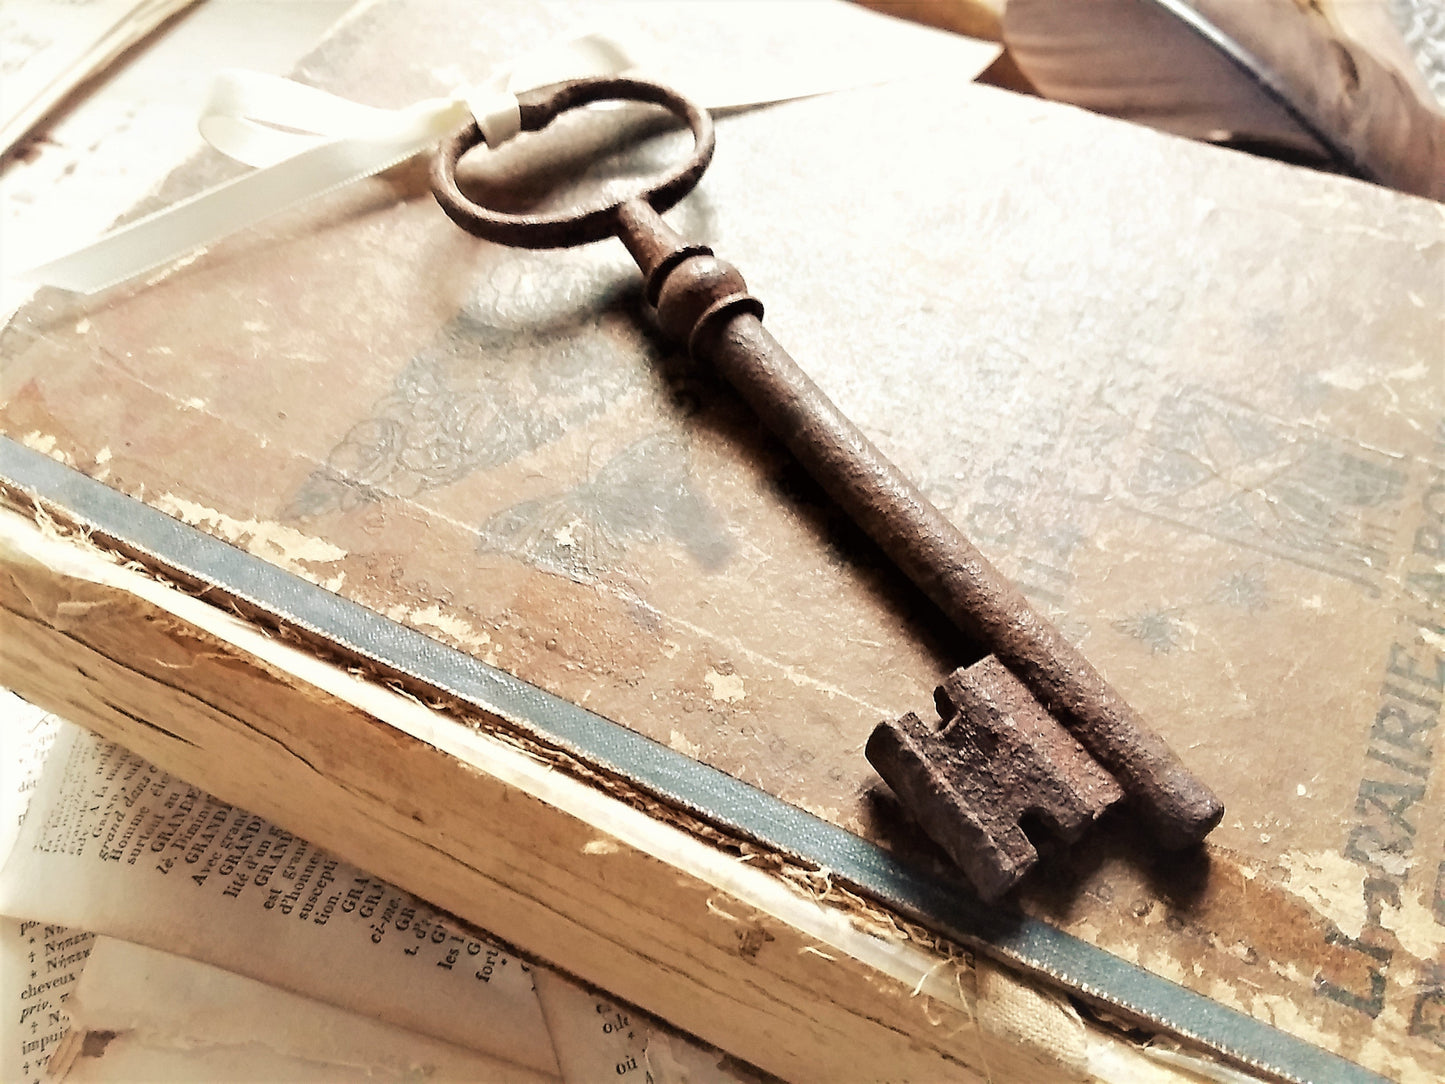 Huge 5¼"/13.5cms Antique Iron Skeleton Key. Iron Key Paperweight. from Tiggy & Pip - €26.00! Shop now at Tiggy and Pip